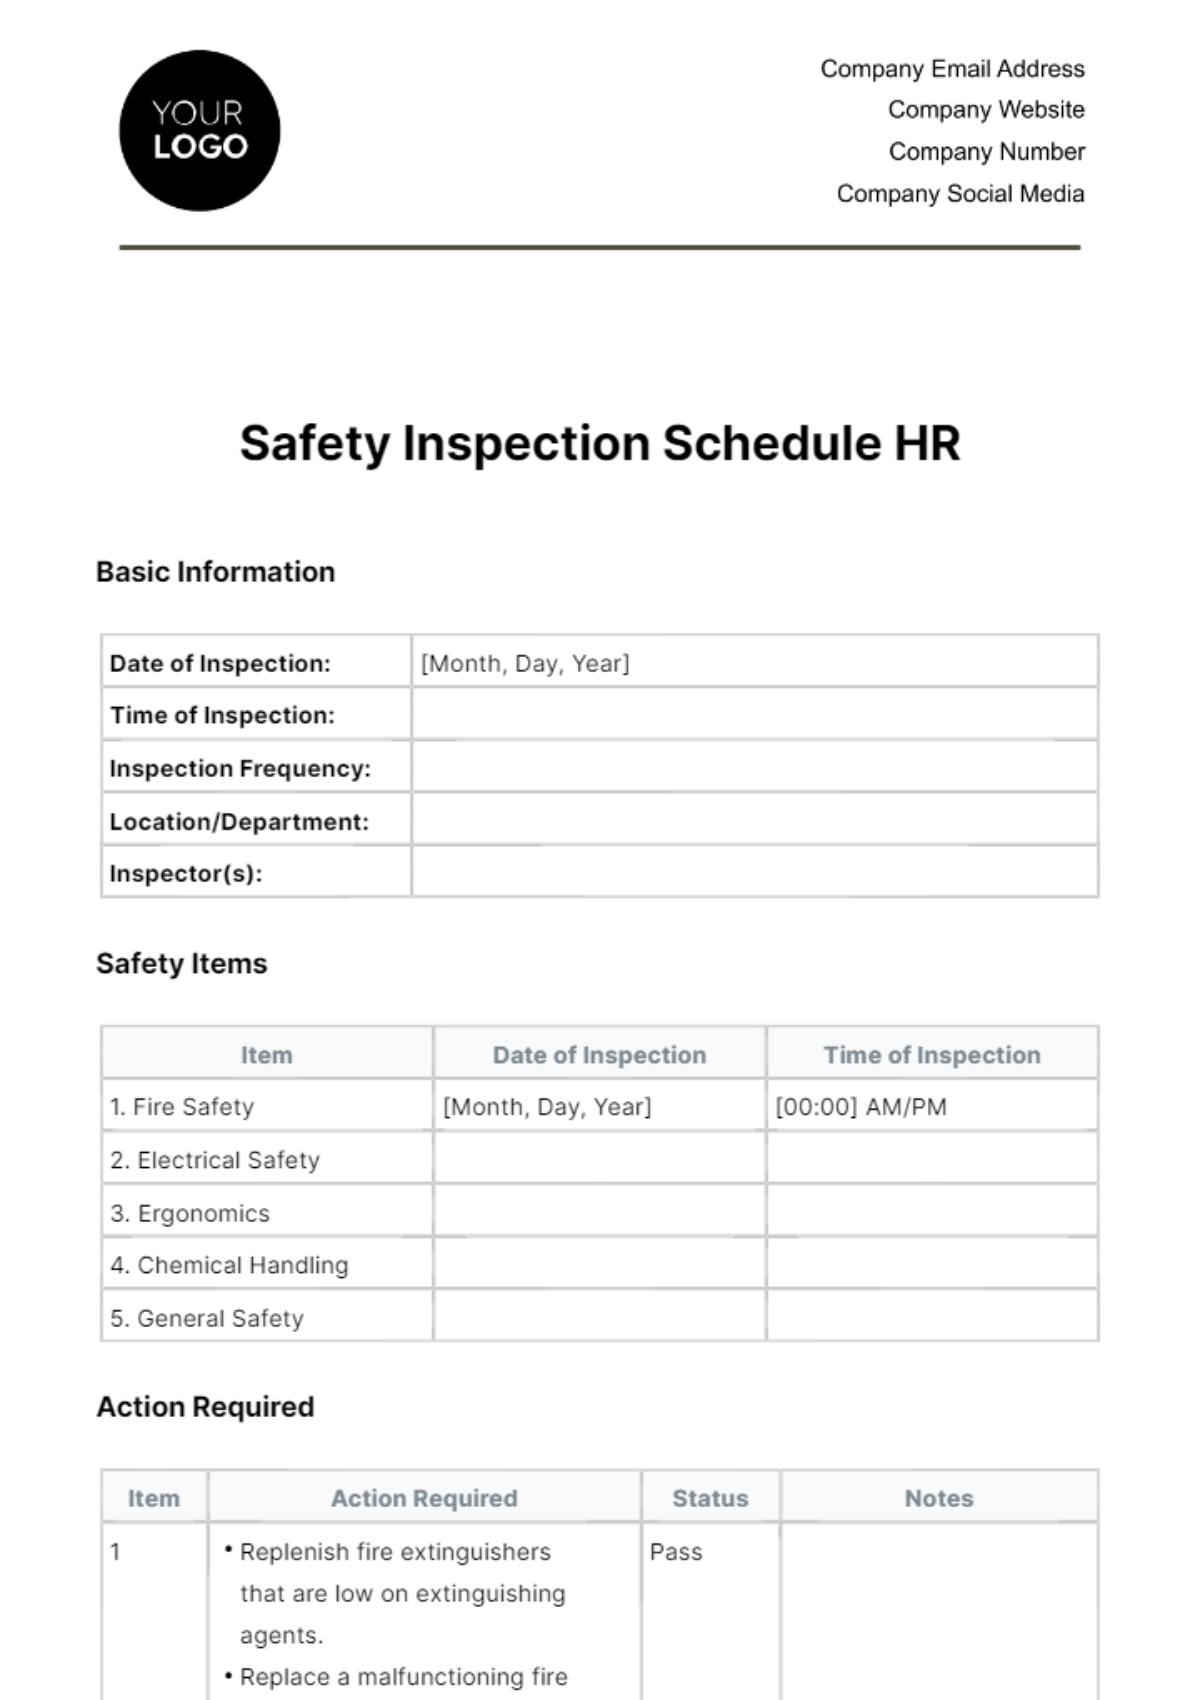 Safety Inspection Schedule HR Template